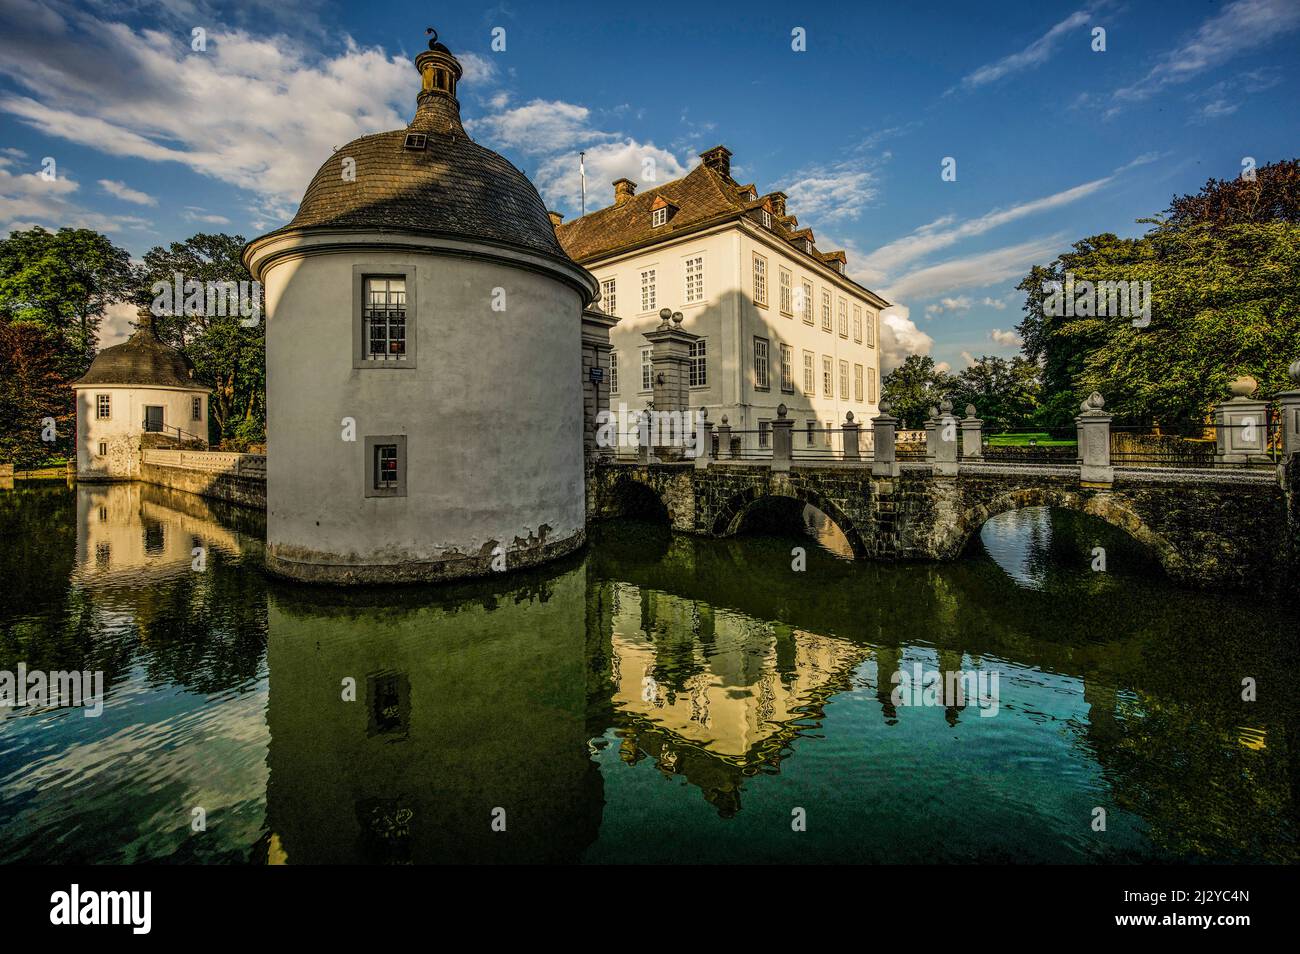 Vinsebeck moated castle in Steinheim in the evening light, Steinheim municipality, North Rhine-Westphalia, Germany Stock Photo